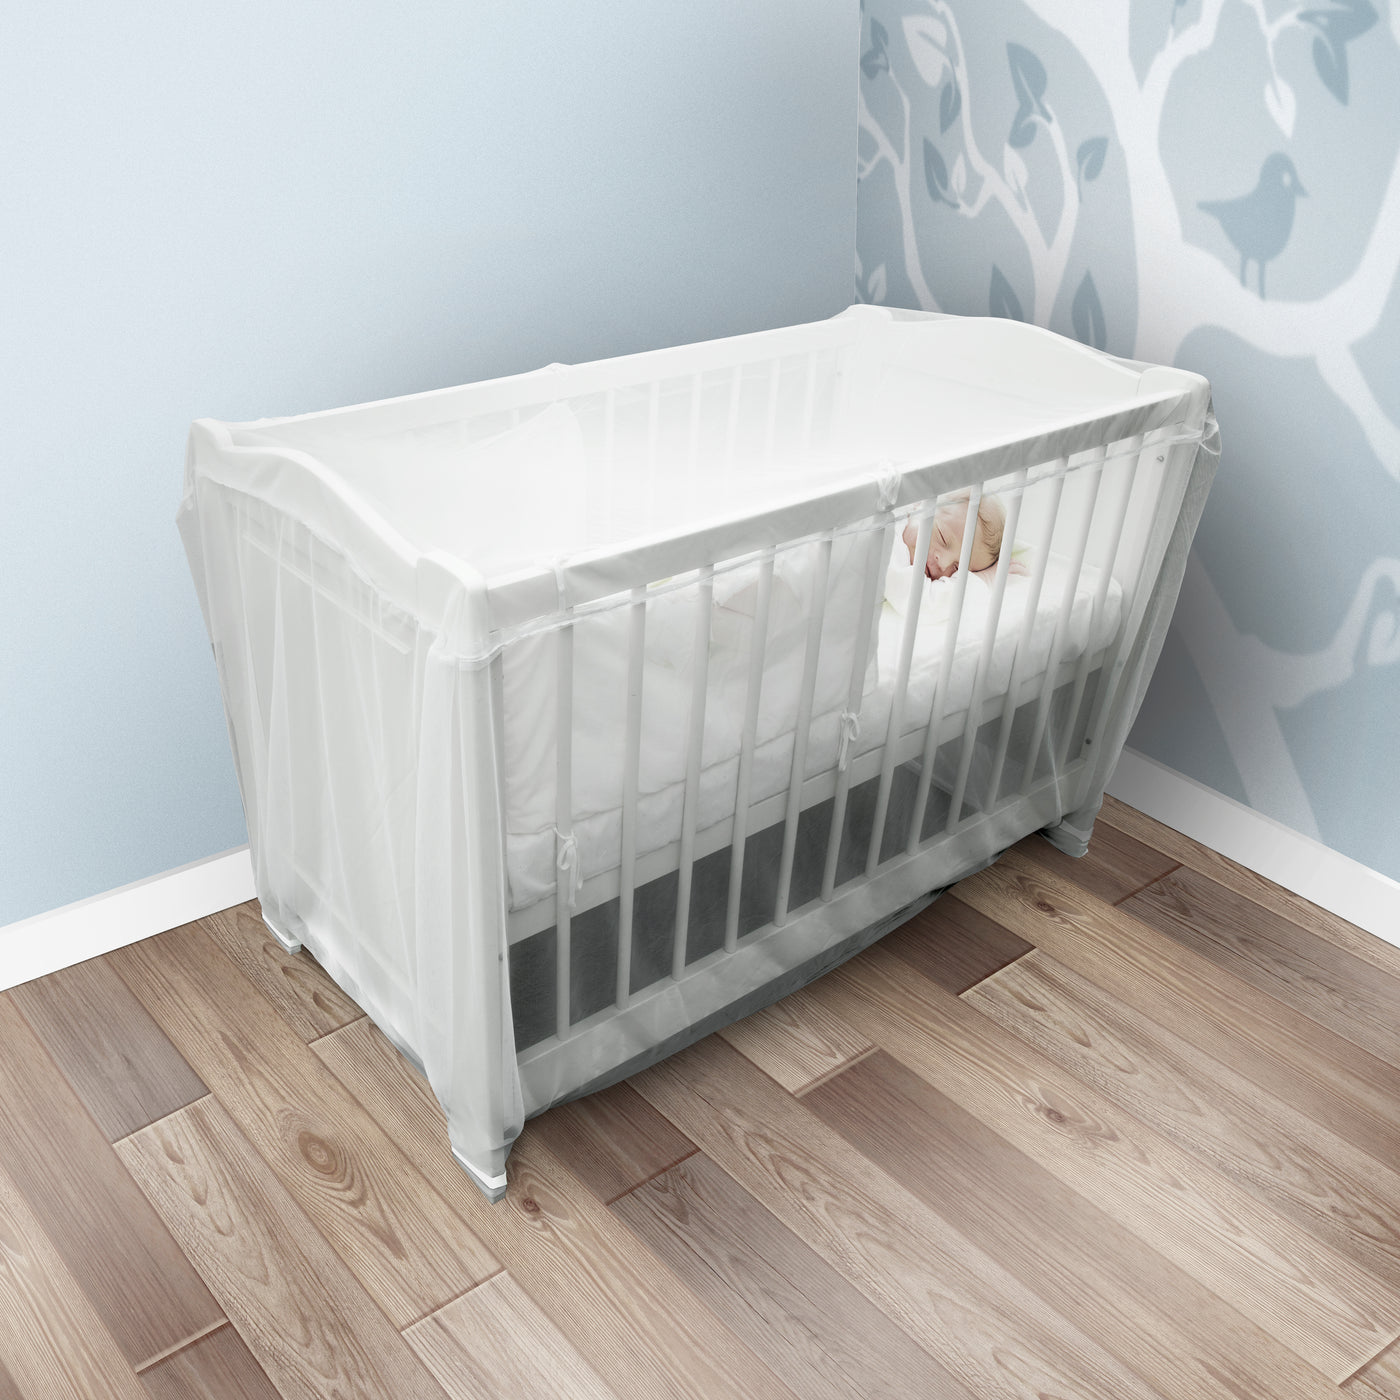 Alecto BV-22 - Mosquito net baby room